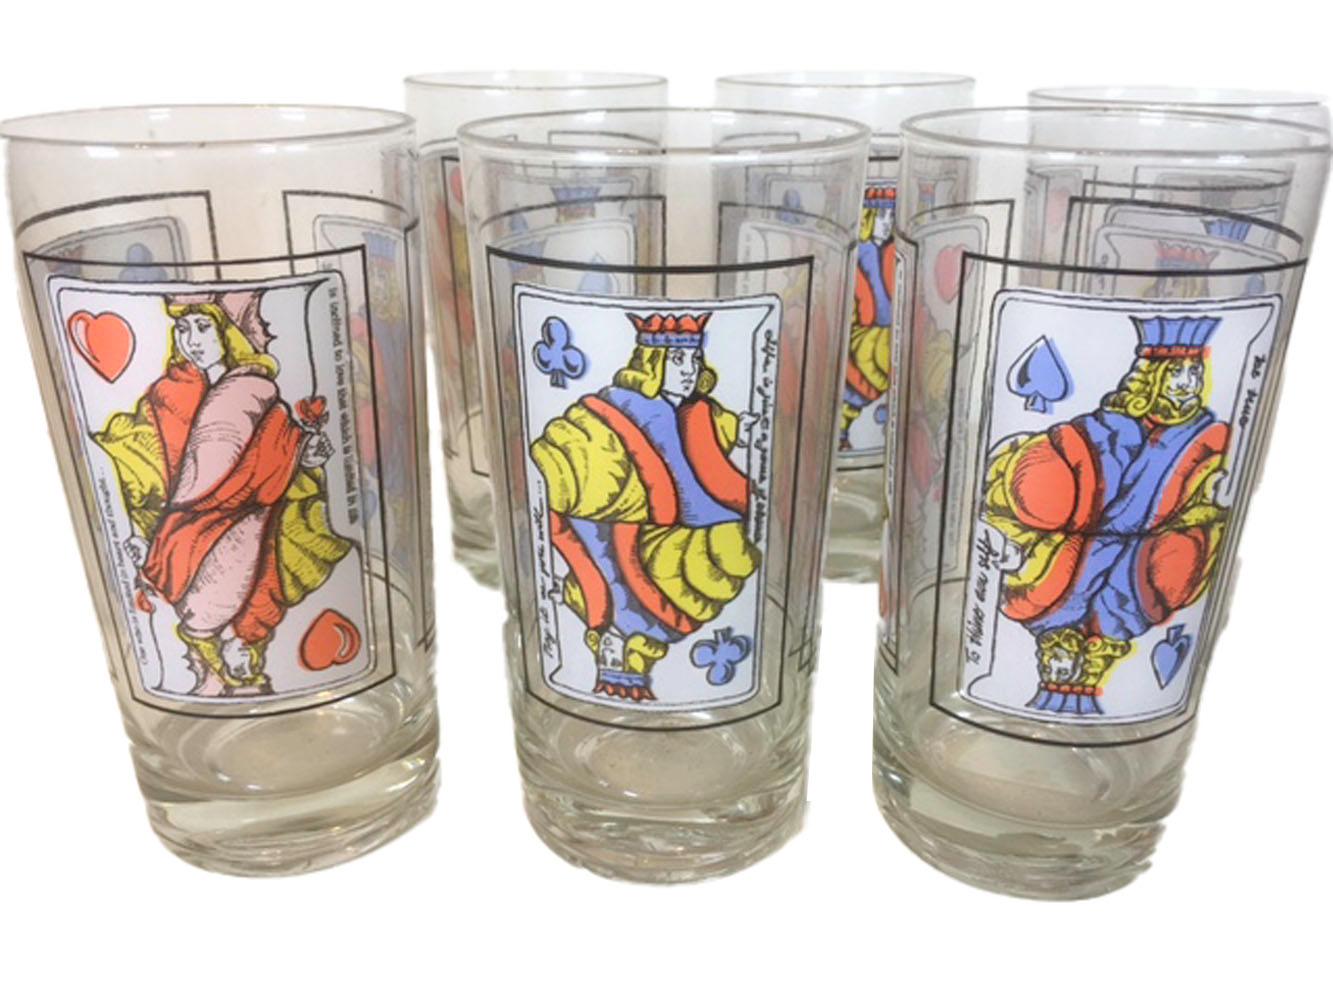 Set of 6 vintage playing card highball glasses designed by Dorothy Thorpe. Each glass with three images of picture cards, the king of clubs, the queen of hearts and the king of spades, each card with a different quote:

King of clubs: Life is just